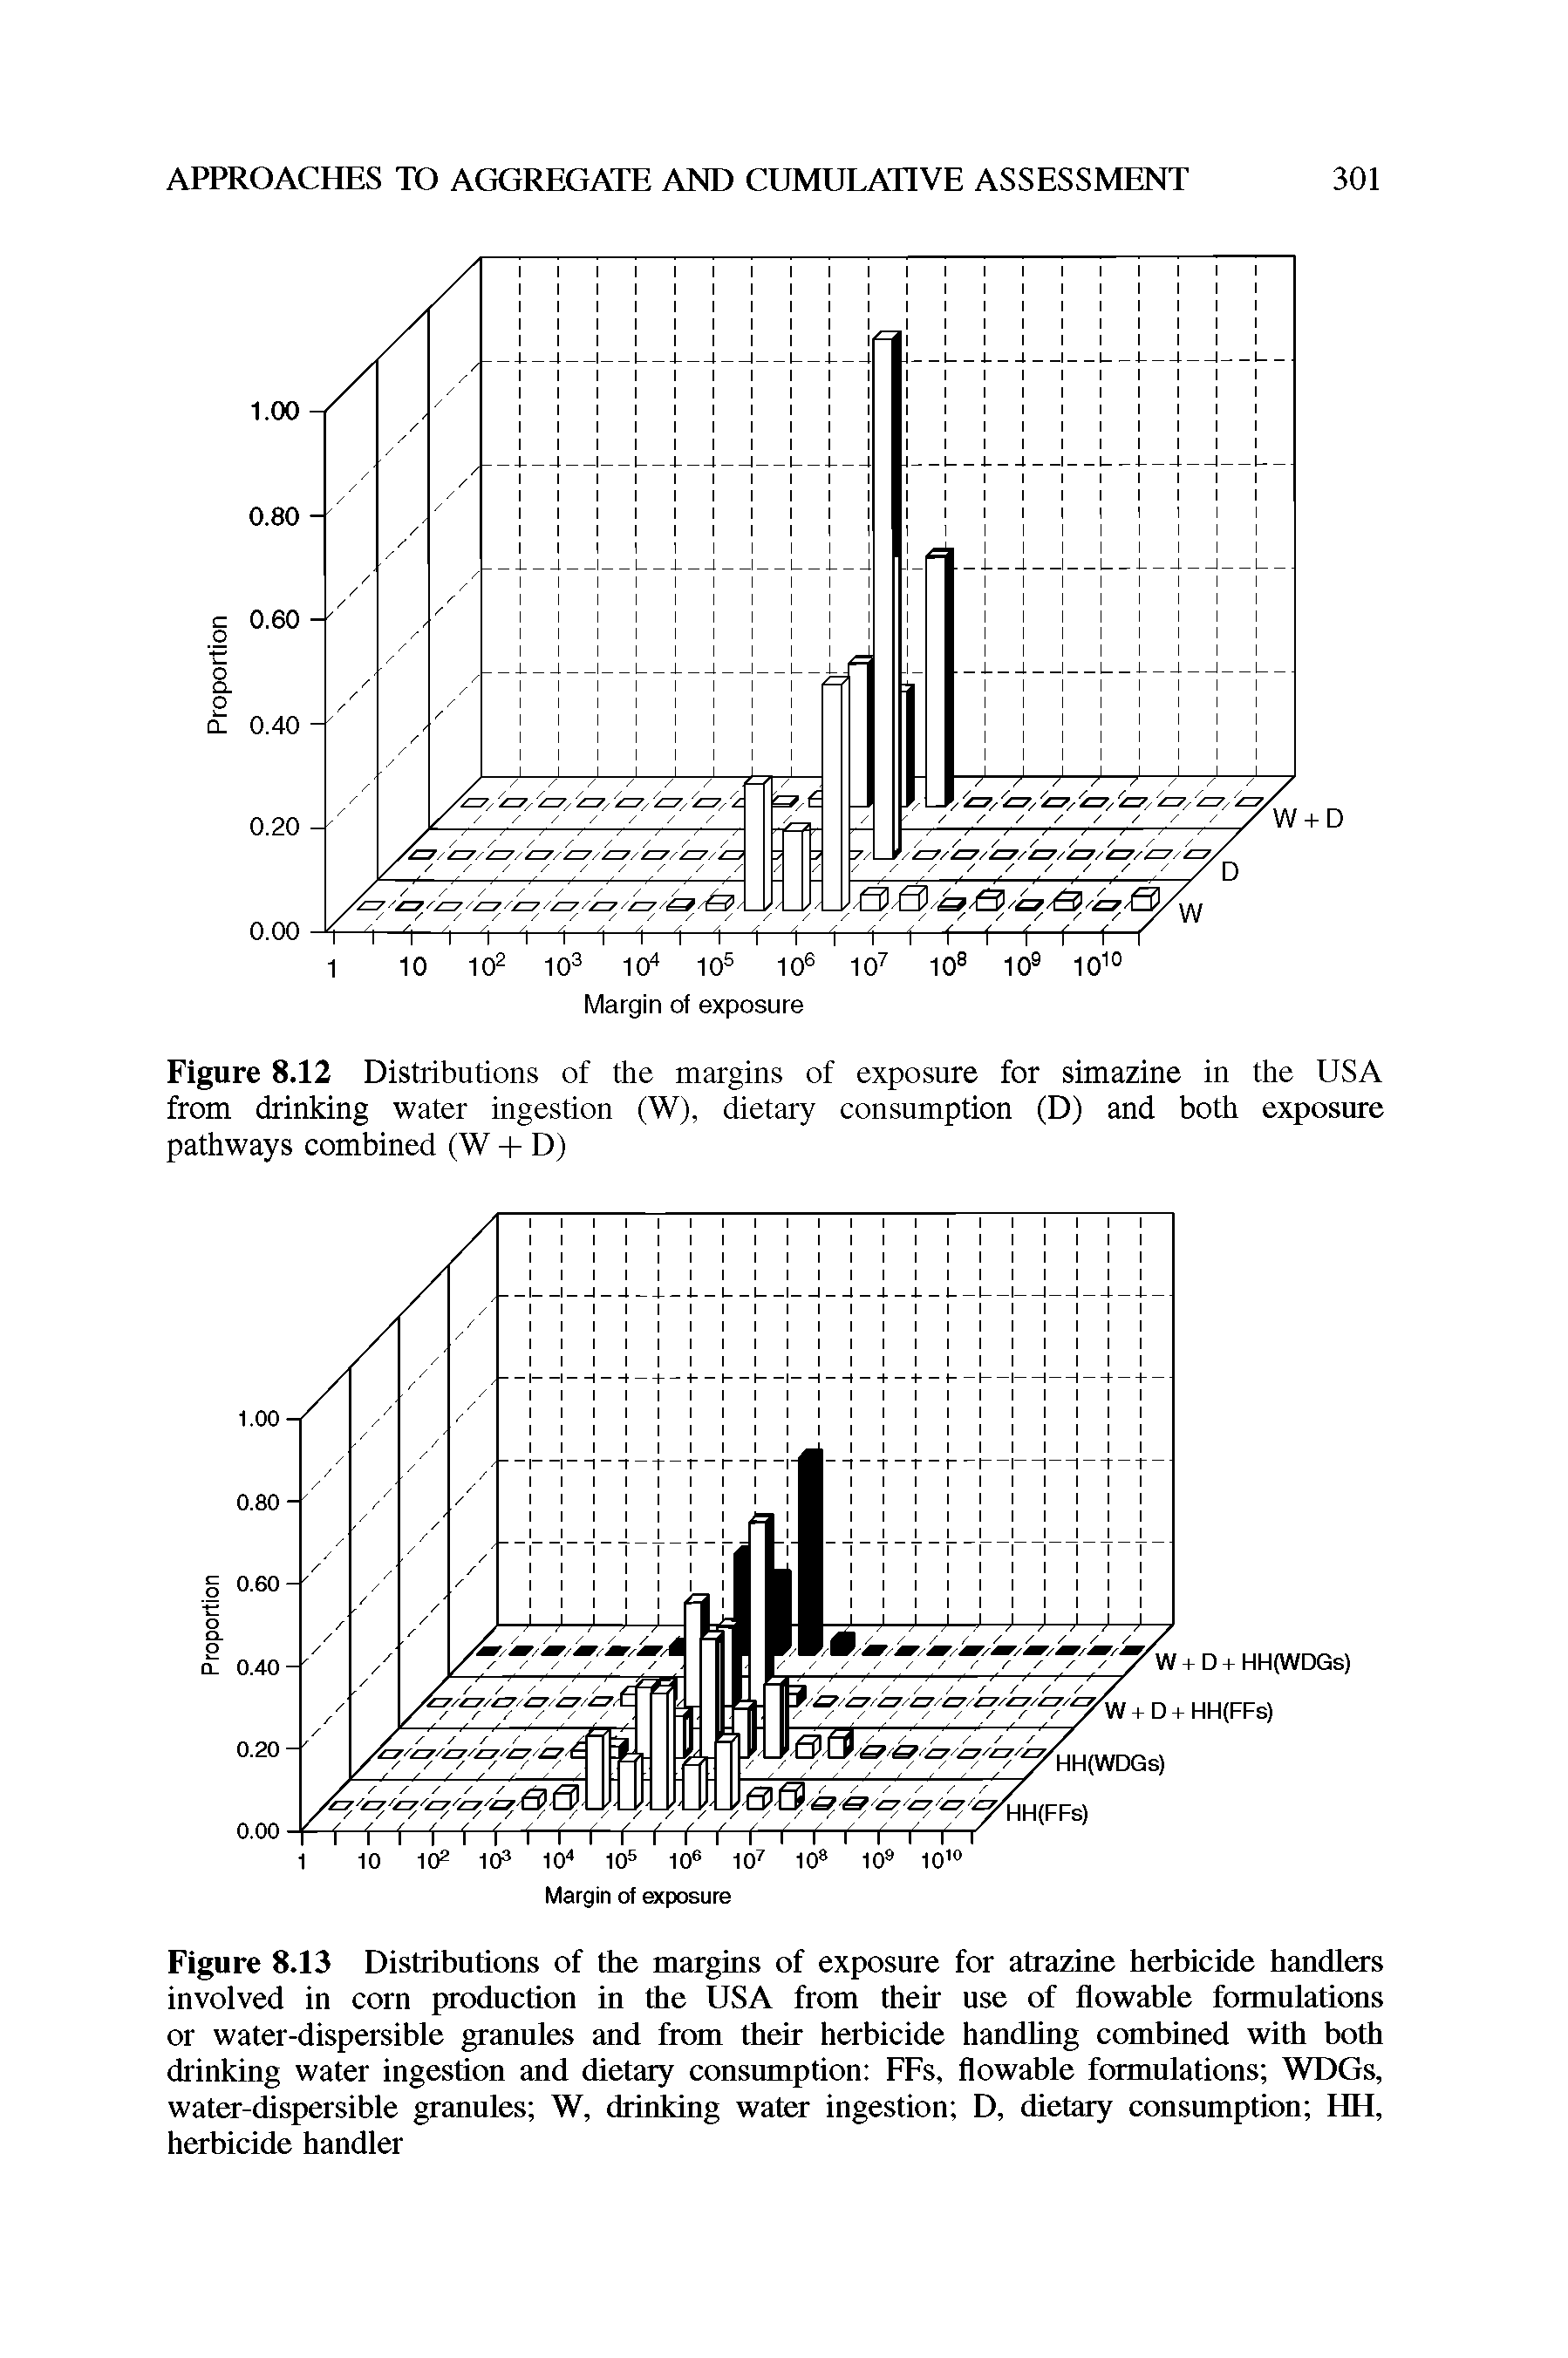 Figure 8.13 Distributions of the margins of exposure for atrazine herbicide handlers involved in corn production in the USA from their use of flowable formulations or water-dispersible granules and from their herbicide handling combined with both drinking water ingestion and dietary consumption FFs, flowable formulations WDGs, water-dispersible granules W, drinking water ingestion D, dietary consumption HH, herbicide handler...